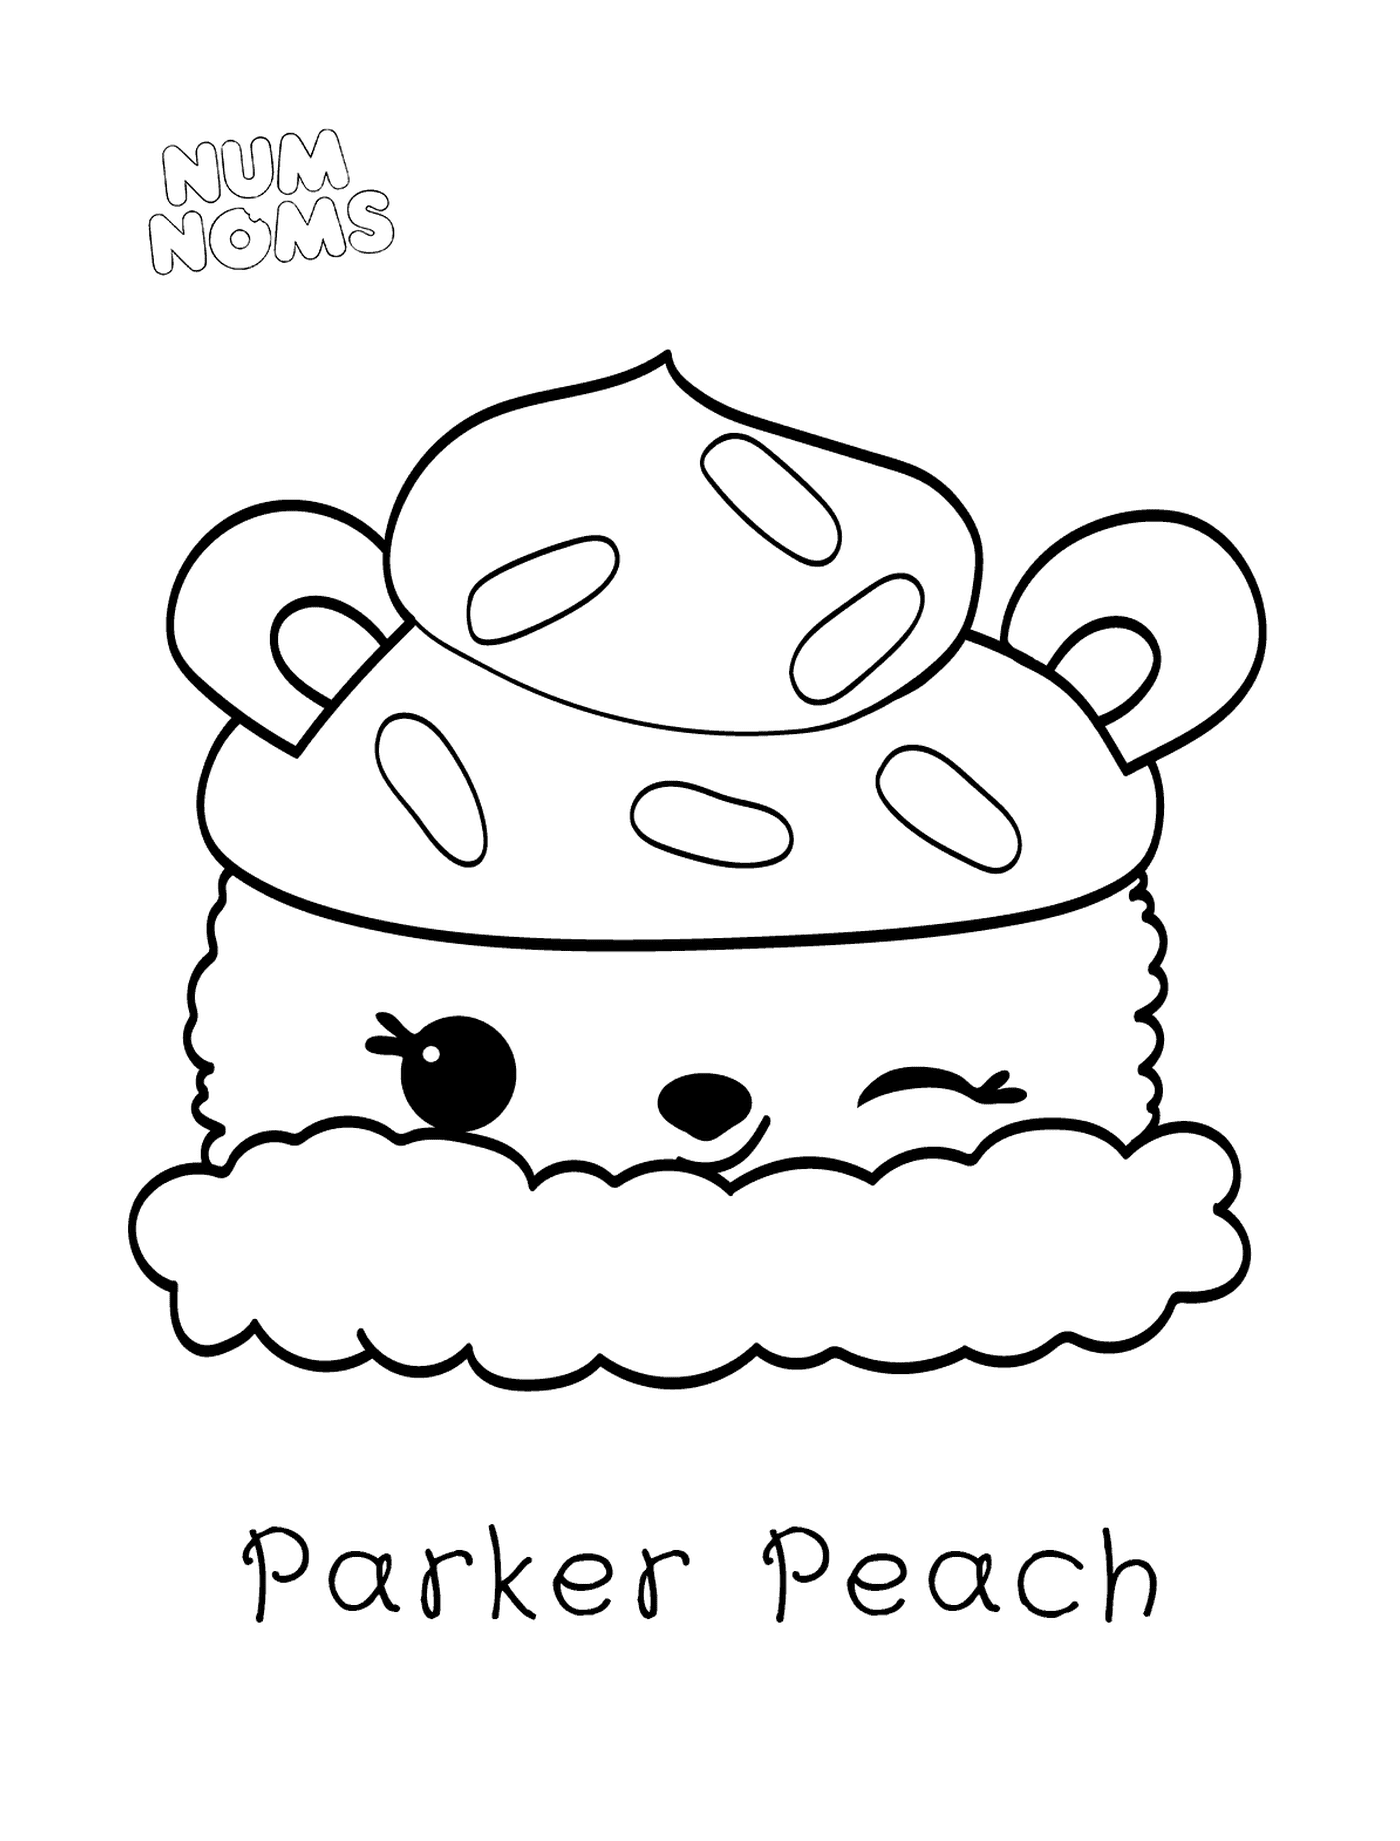  Parker Pearch 以数字名称命名 